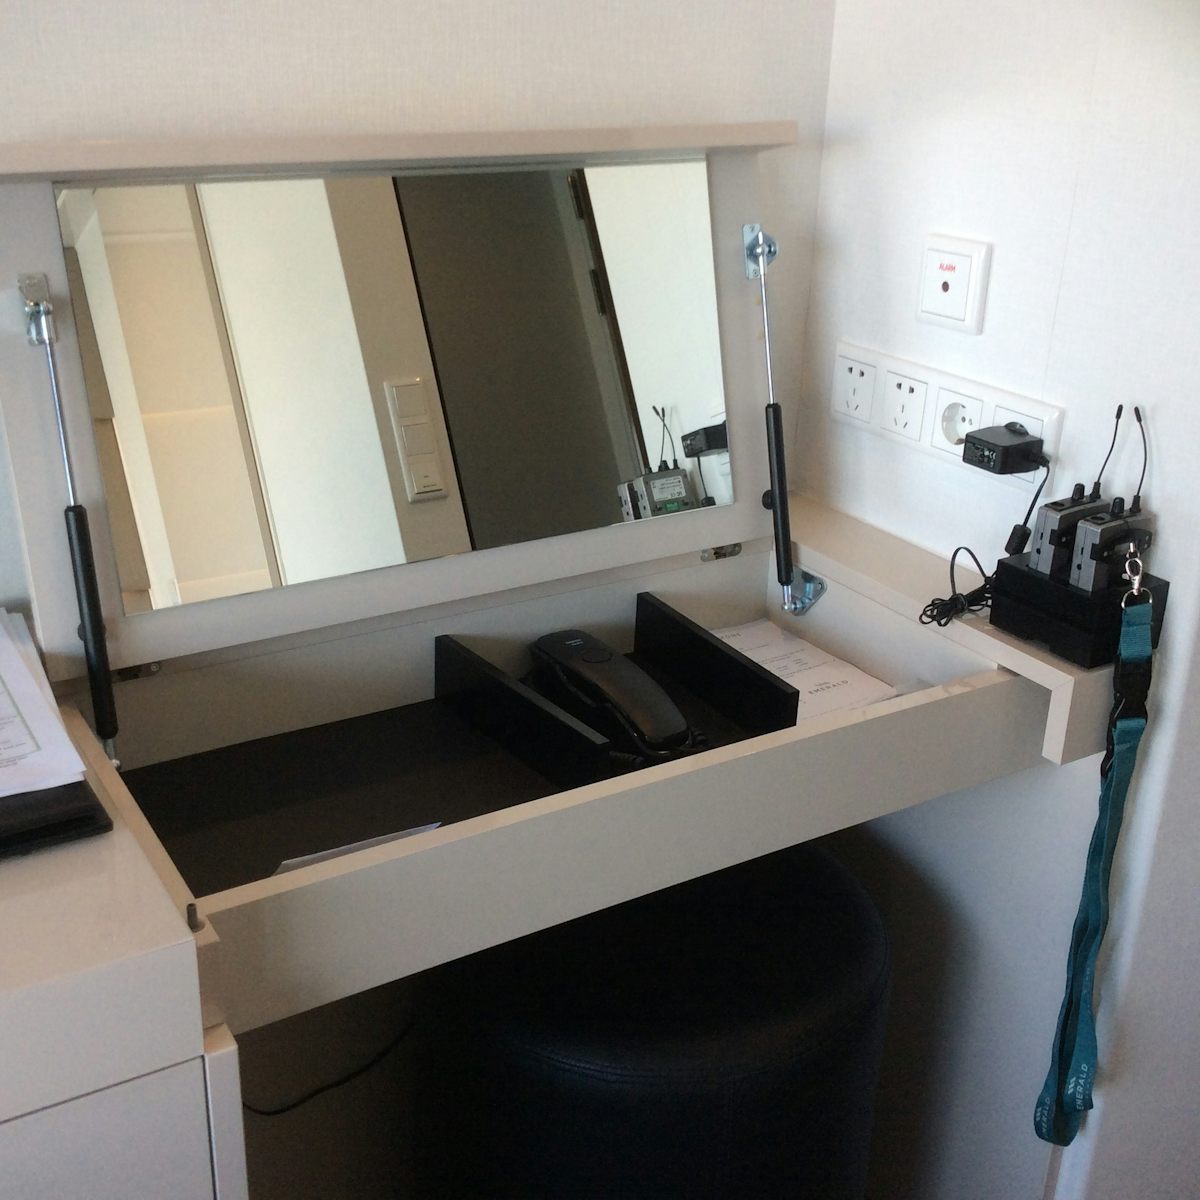 Dressing table. Receivers for use on guided tours.